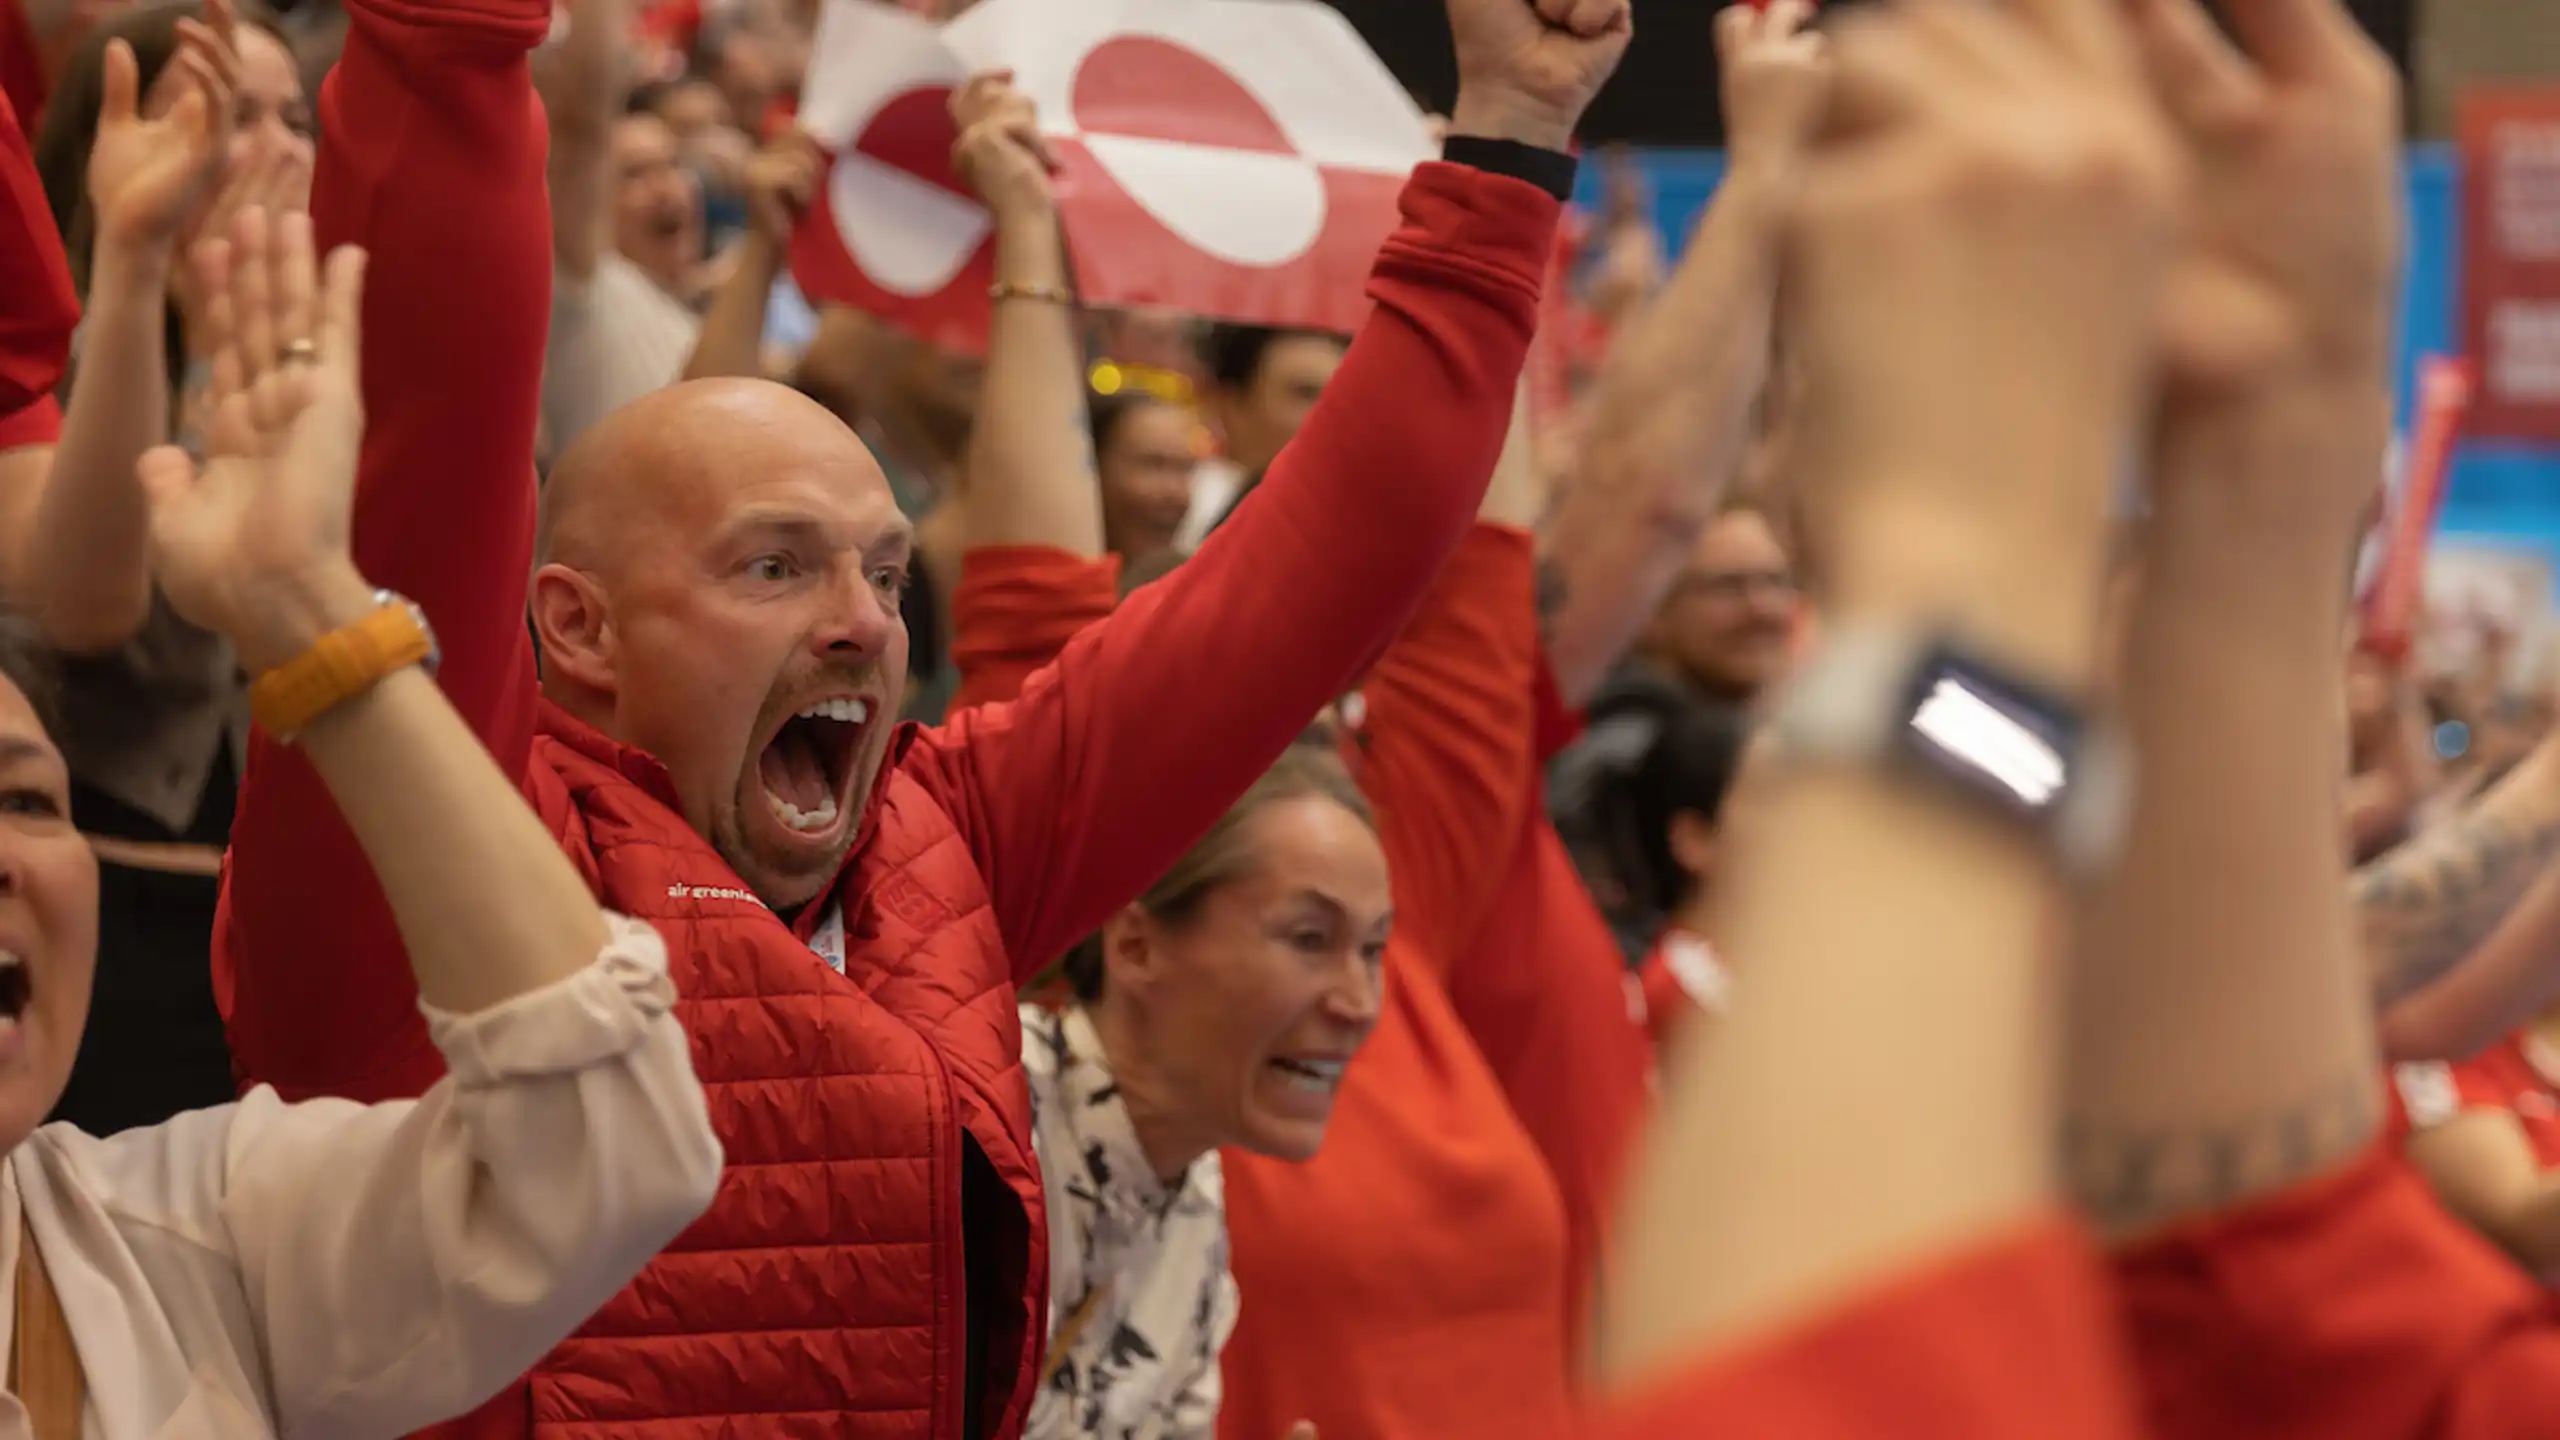 CEO of Air Greenland Group cheering on the women during the final match against Canada. Photo: Lars Kleemann Andersen